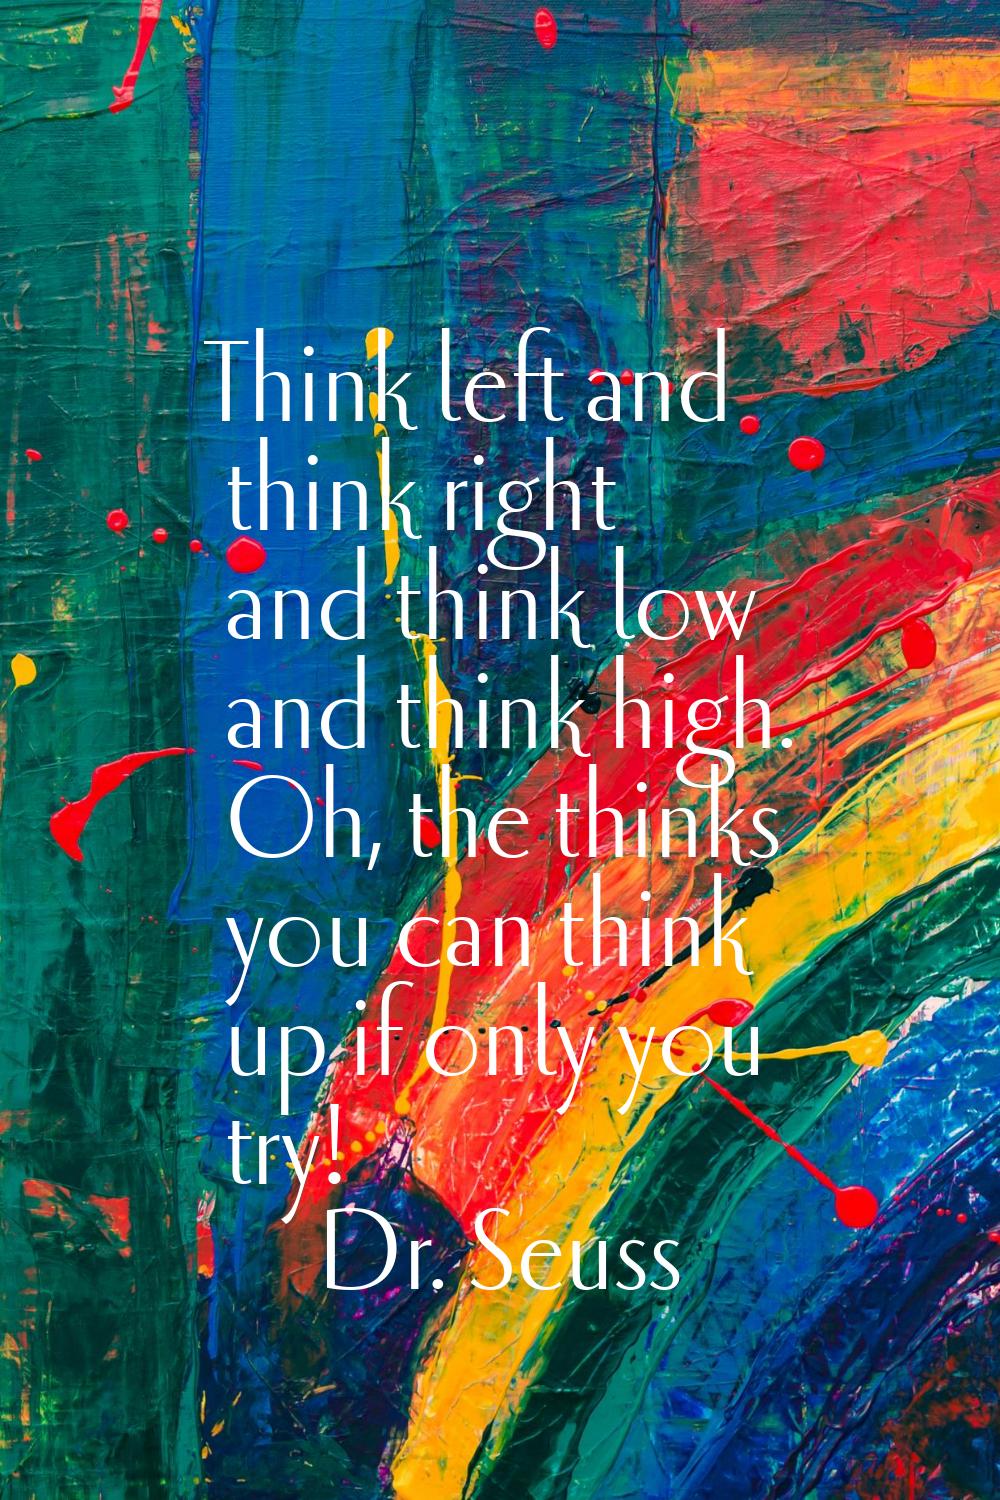 Think left and think right and think low and think high. Oh, the thinks you can think up if only yo